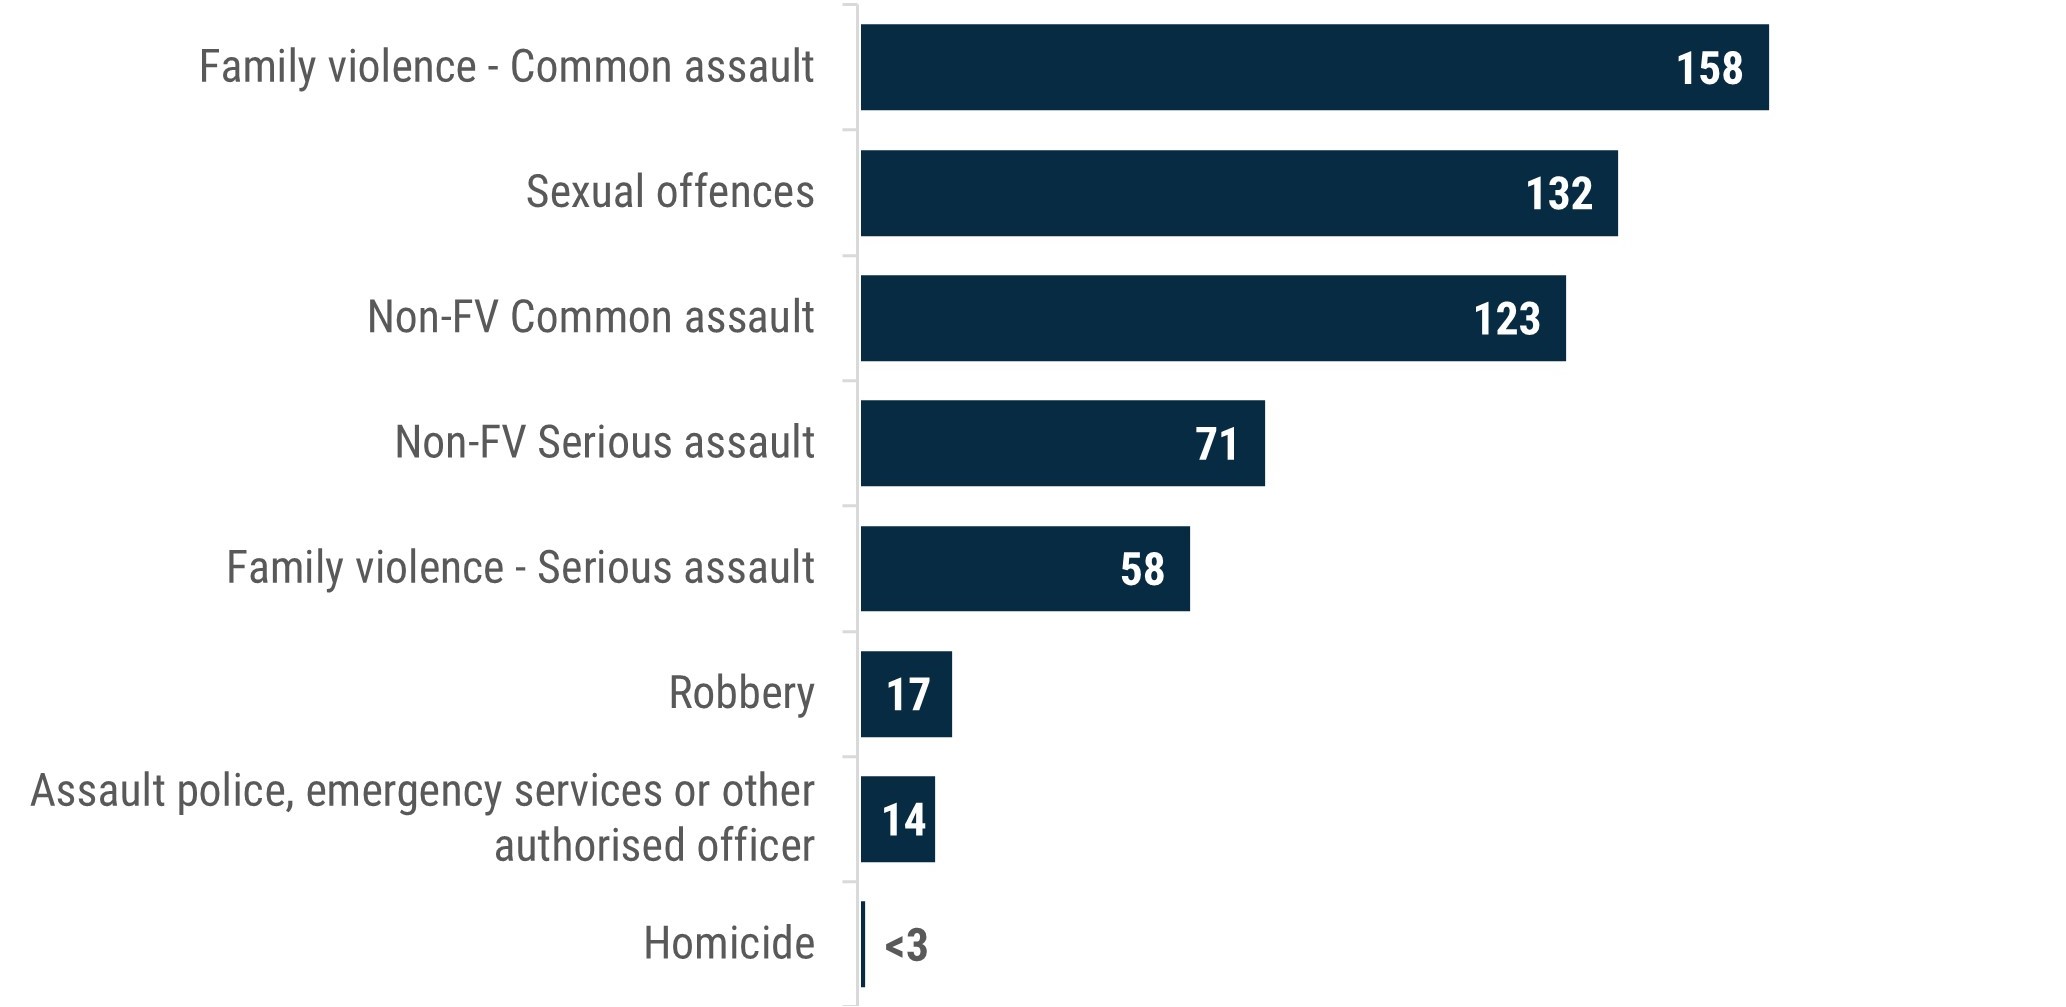 Bar chart shows that family violence: common assault was the largest principal offence category for violent criminal incidents recorded in Boroondara during 2022, with 158 incidents. This was followed by 132 sexual offences, 123 non-family violence common assaults, 71 non-family violence serious assaults, 58 family violence serious assaults, 17 robberies, 14 assaults of a police, emergency services or other authorised officer, and fewer than 3 homicides.